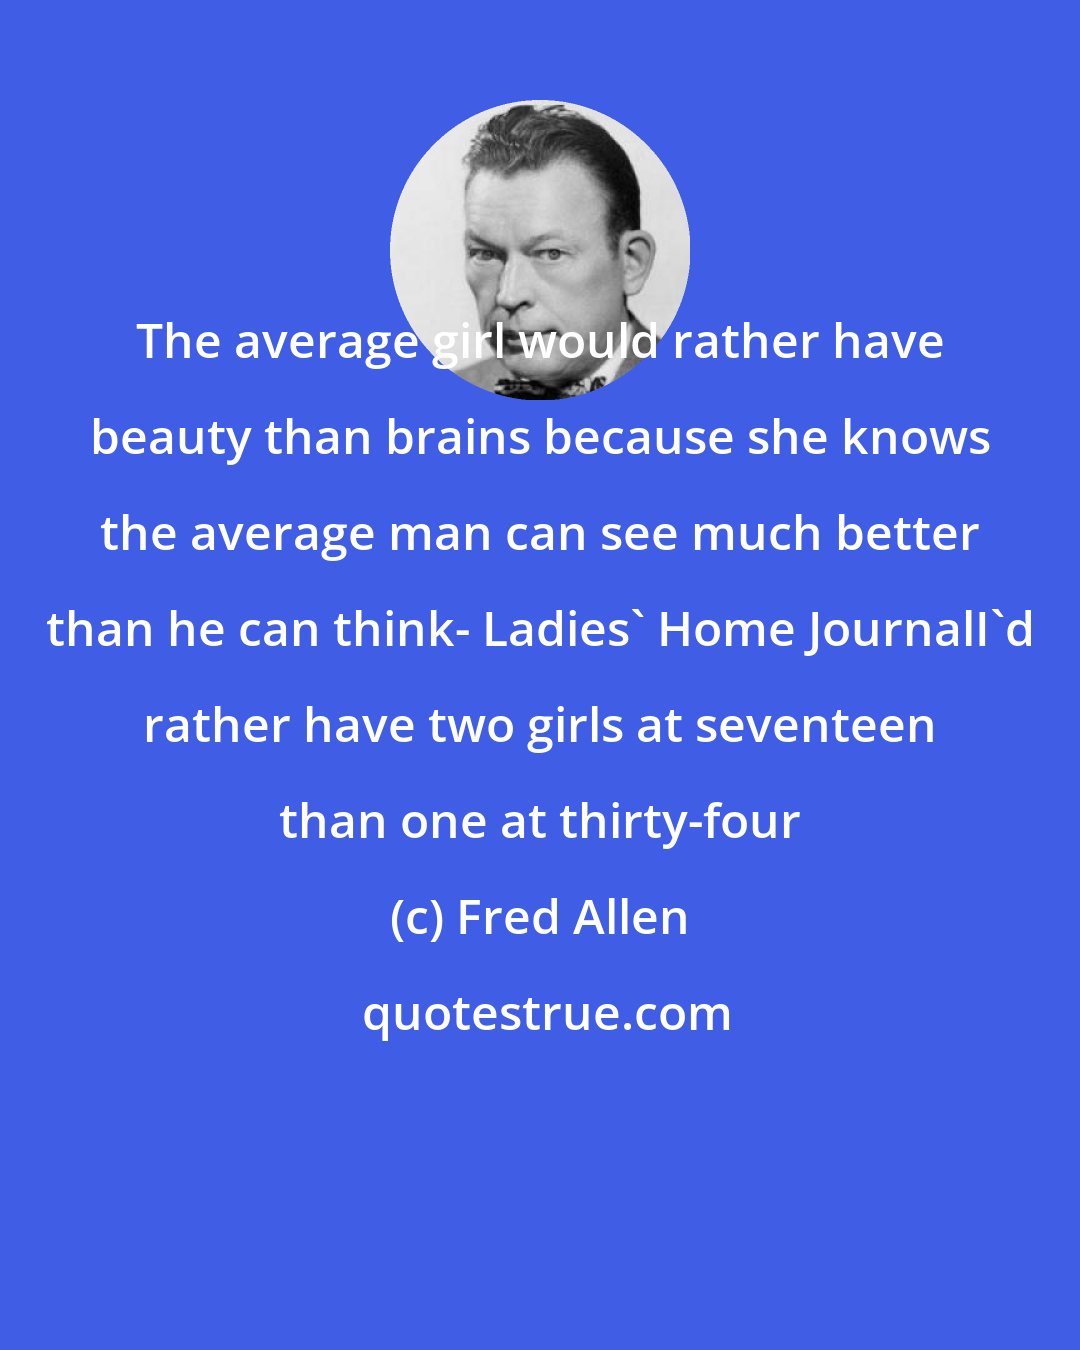 Fred Allen: The average girl would rather have beauty than brains because she knows the average man can see much better than he can think- Ladies' Home JournalI'd rather have two girls at seventeen than one at thirty-four